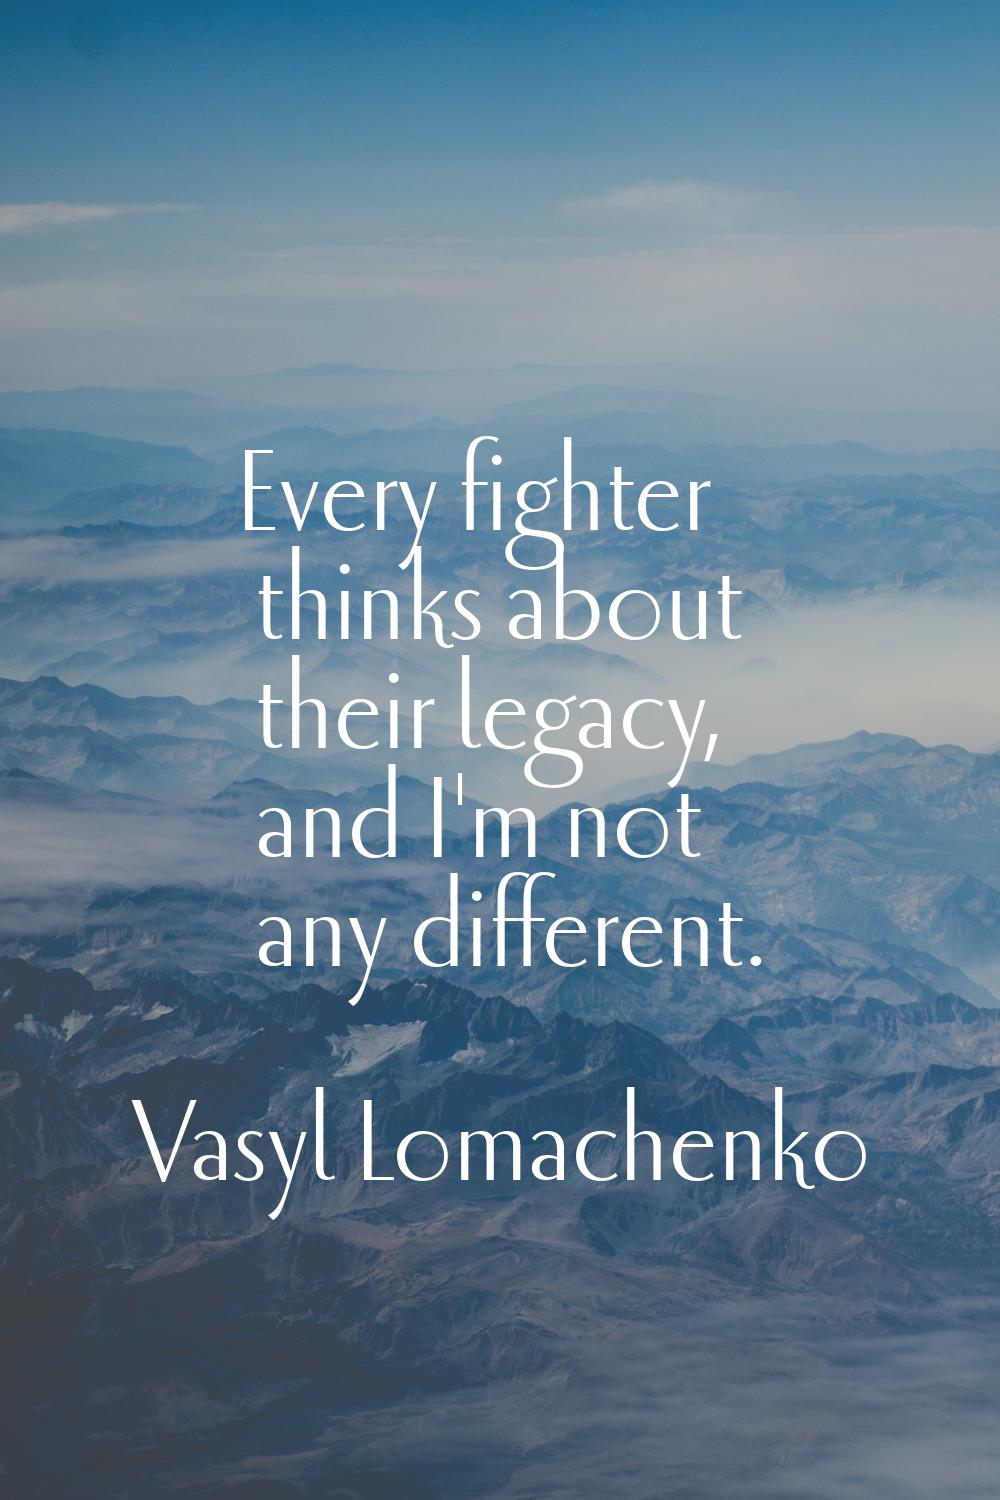 Every fighter thinks about their legacy, and I'm not any different.